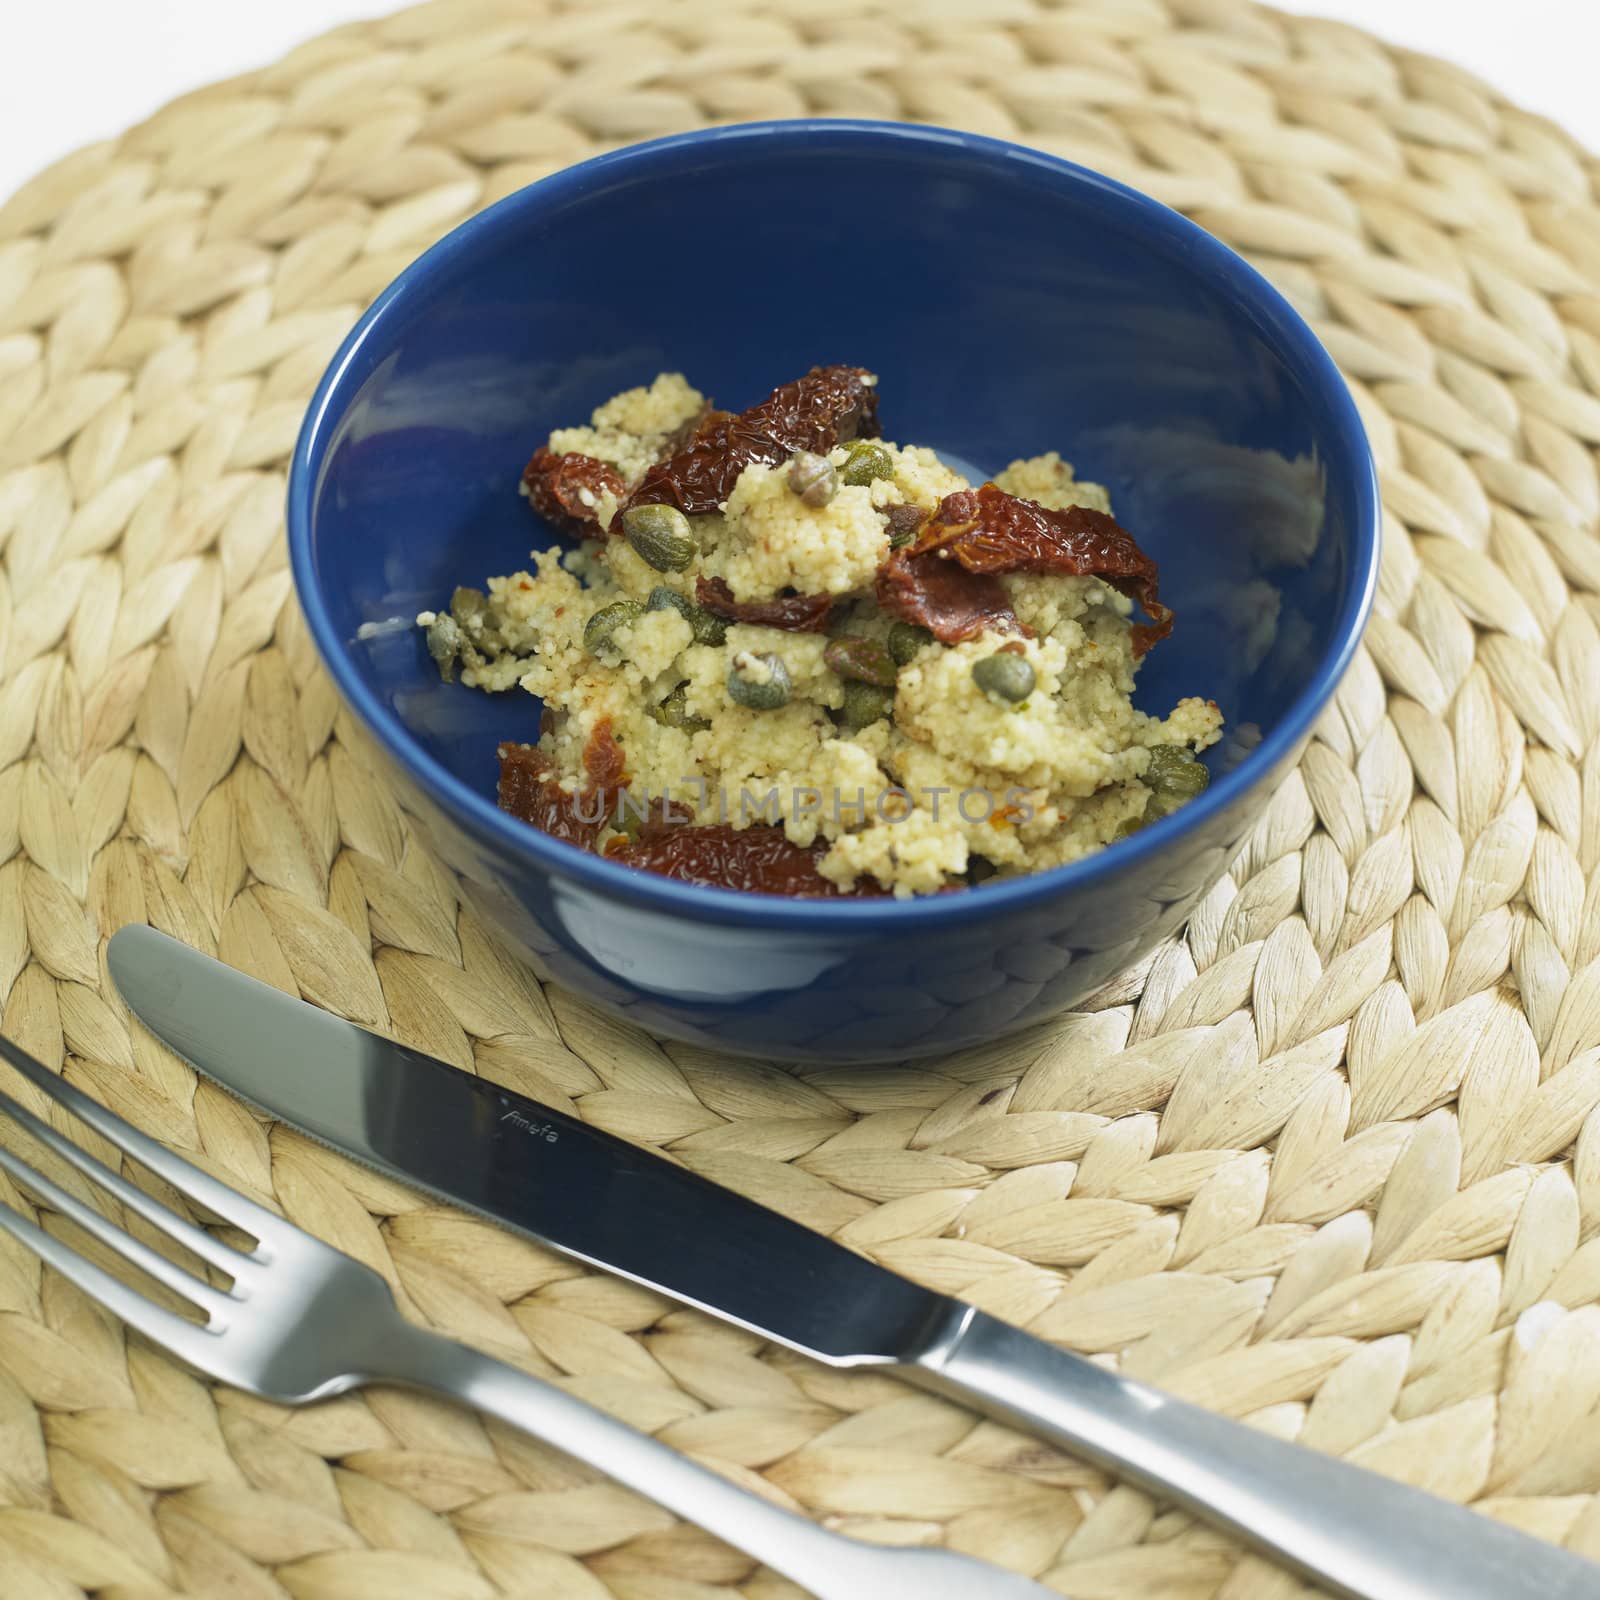 warm couscous salad with dried tomatoes and capers